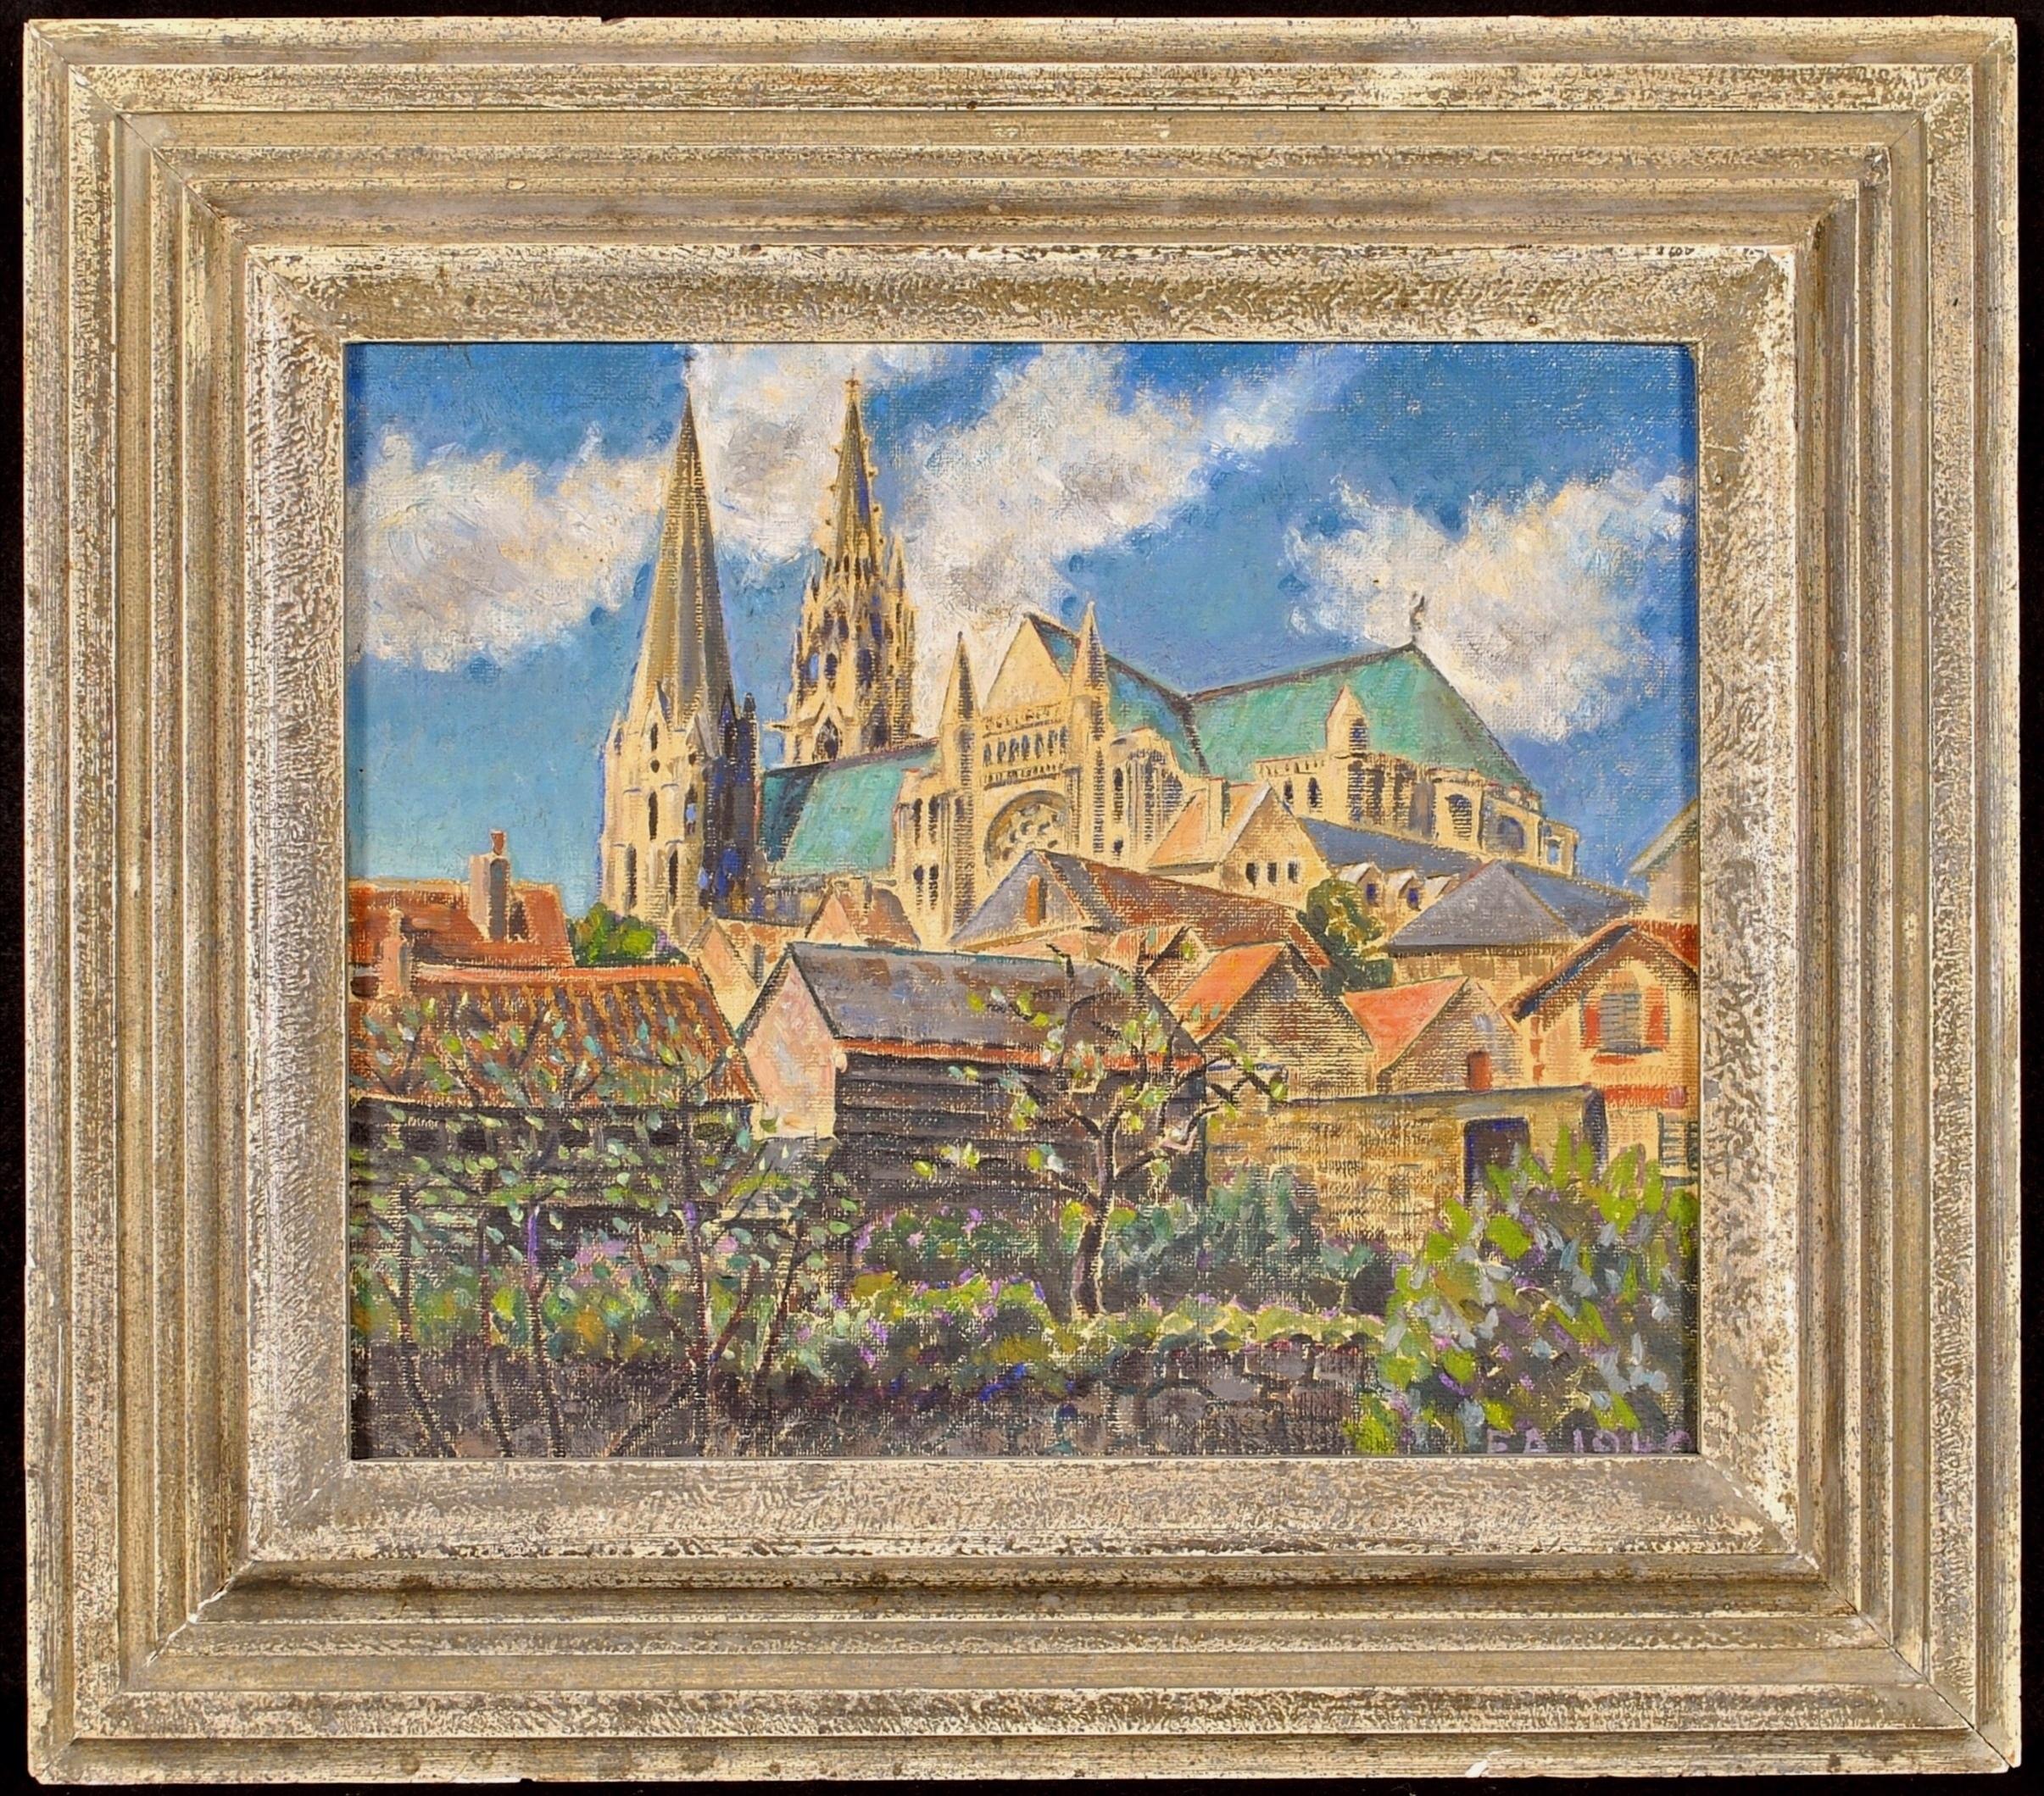 Chartres - English Impressionist France Town Landscape Oil on Canvas Painting